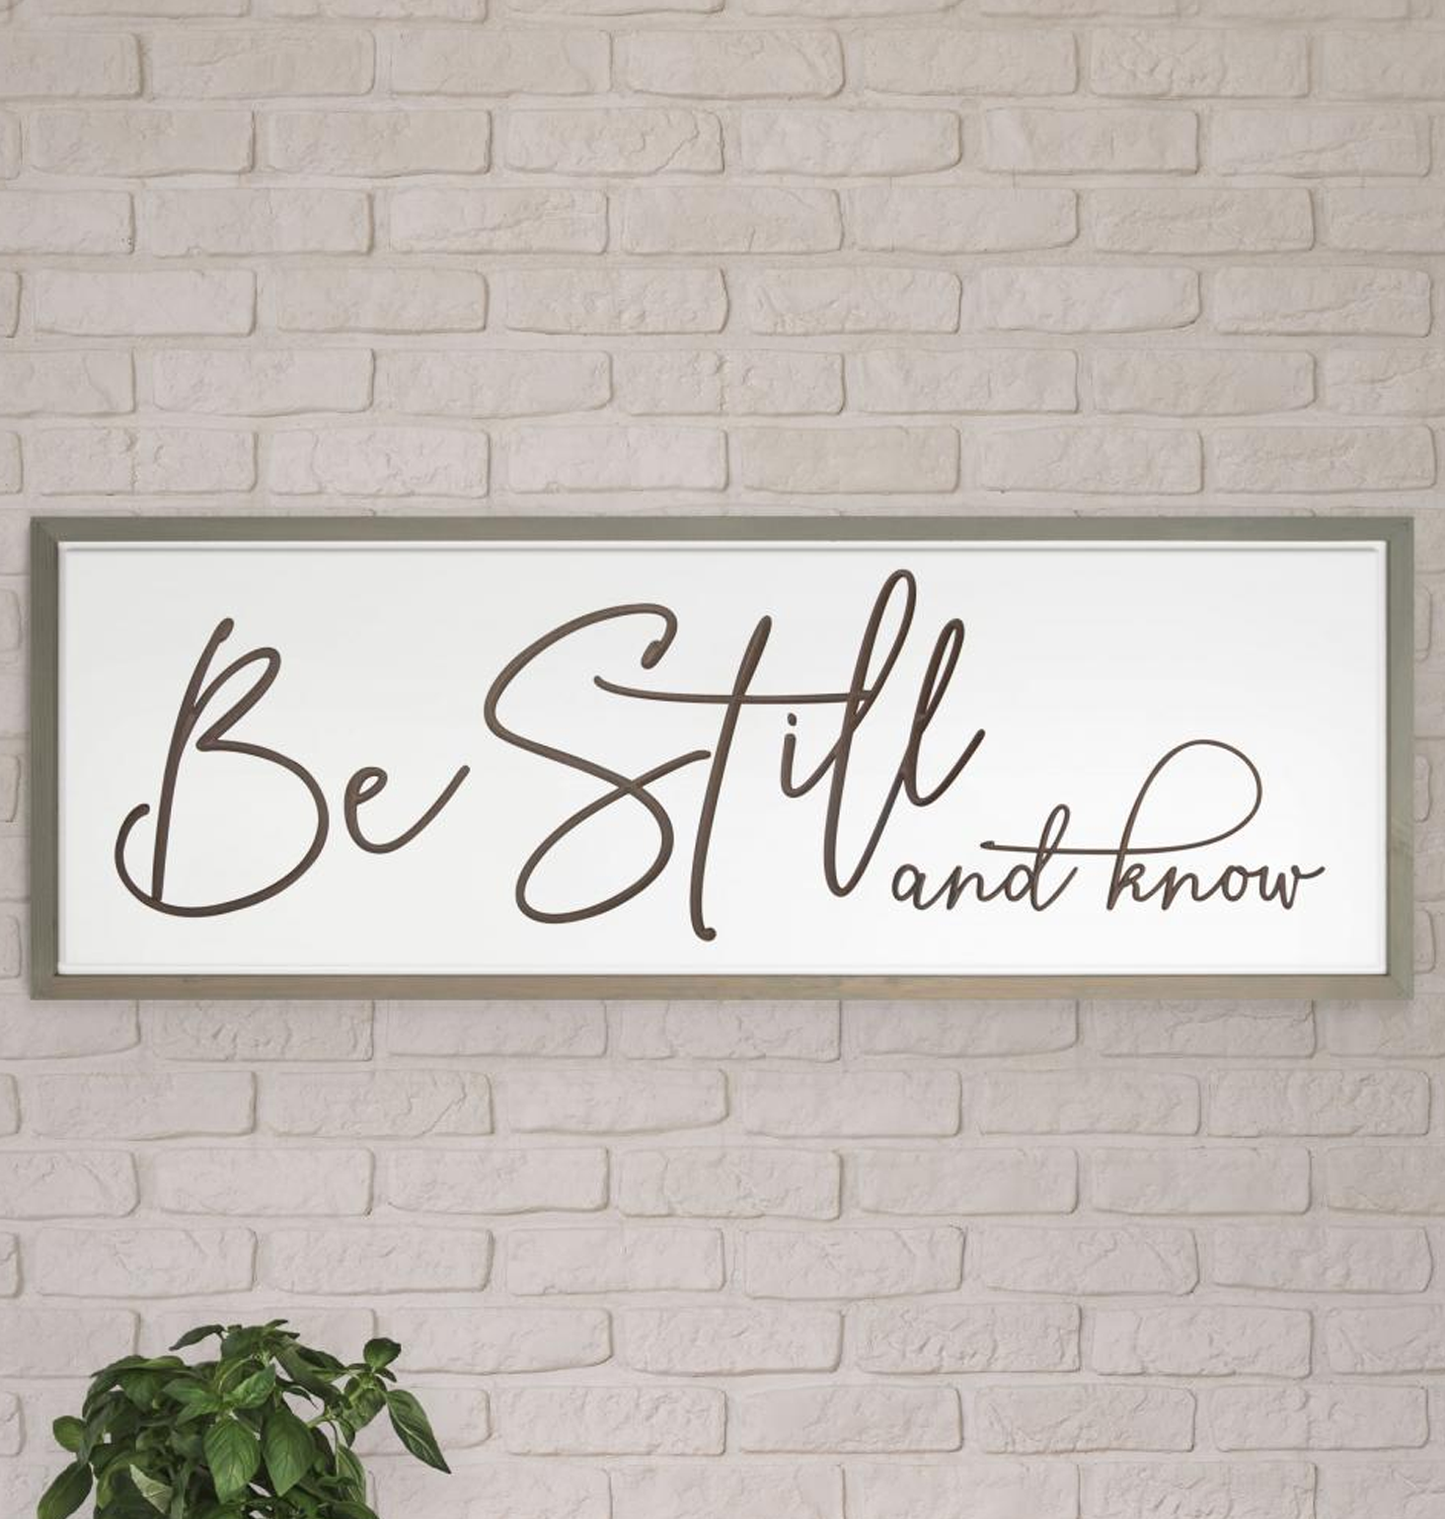 Be Still and Know Sign - Southern Grace Creations